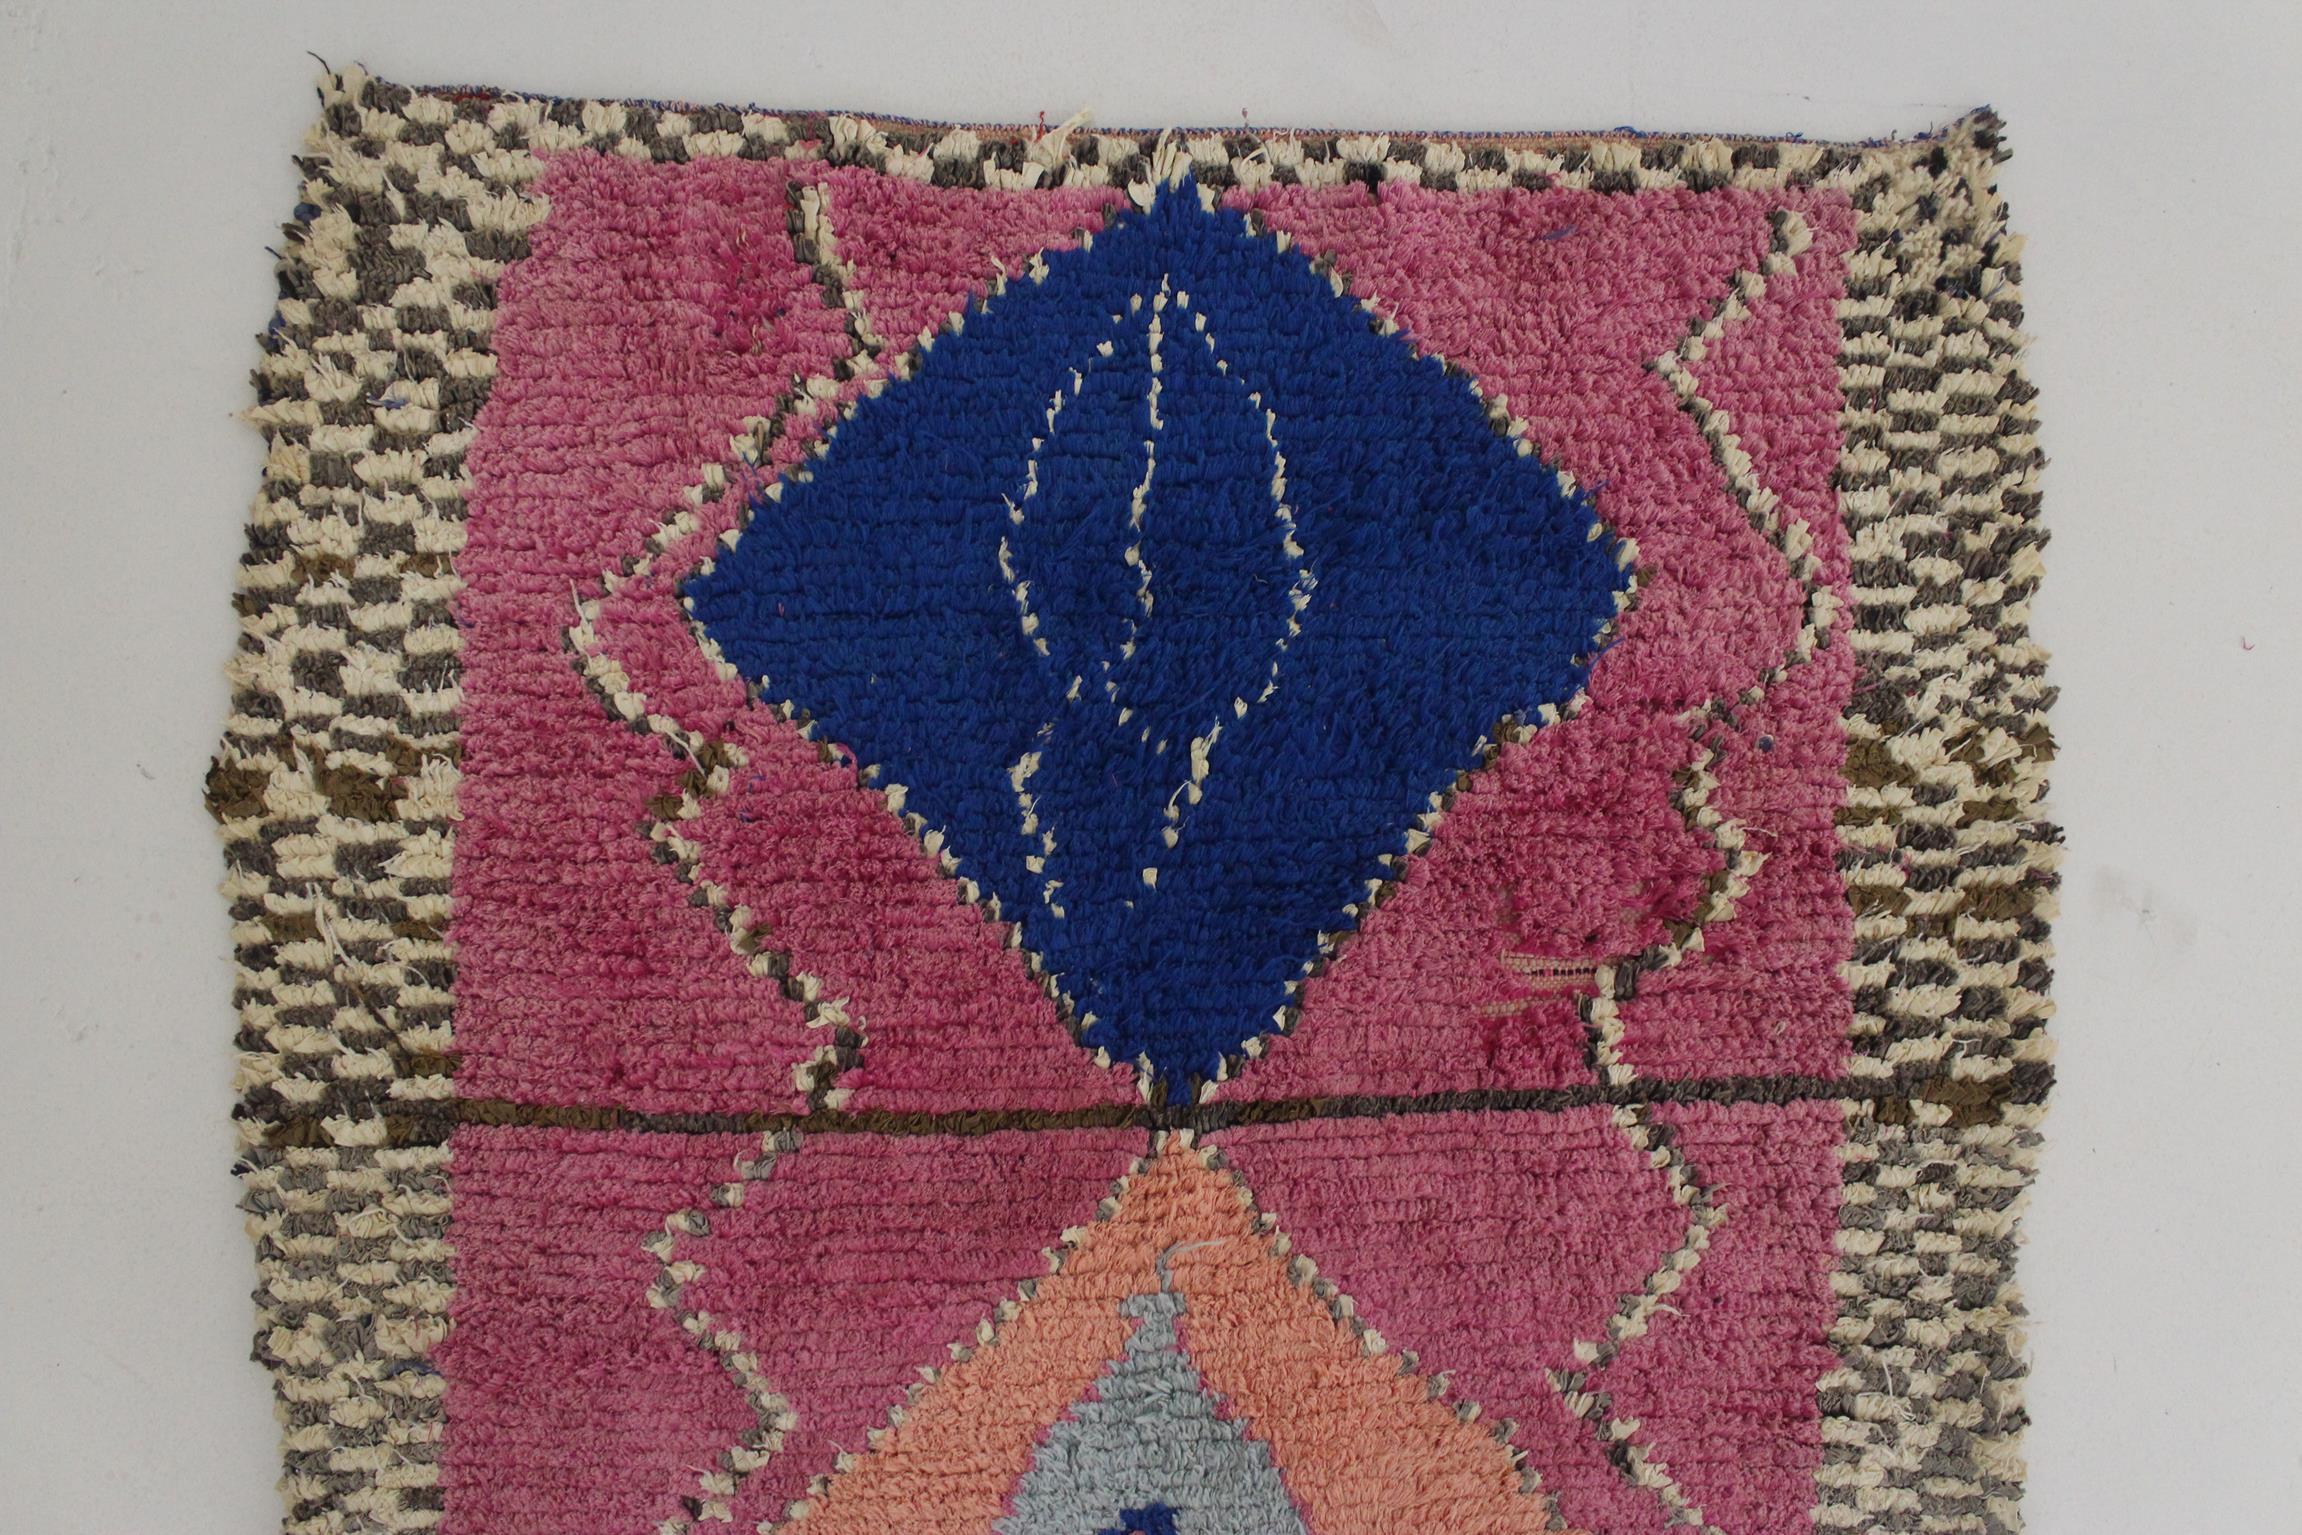 Vintage Moroccan Boucherouite rug- Pink/blue - 3.4x7.4feet / 105x227cm In Good Condition For Sale In Marrakech, MA